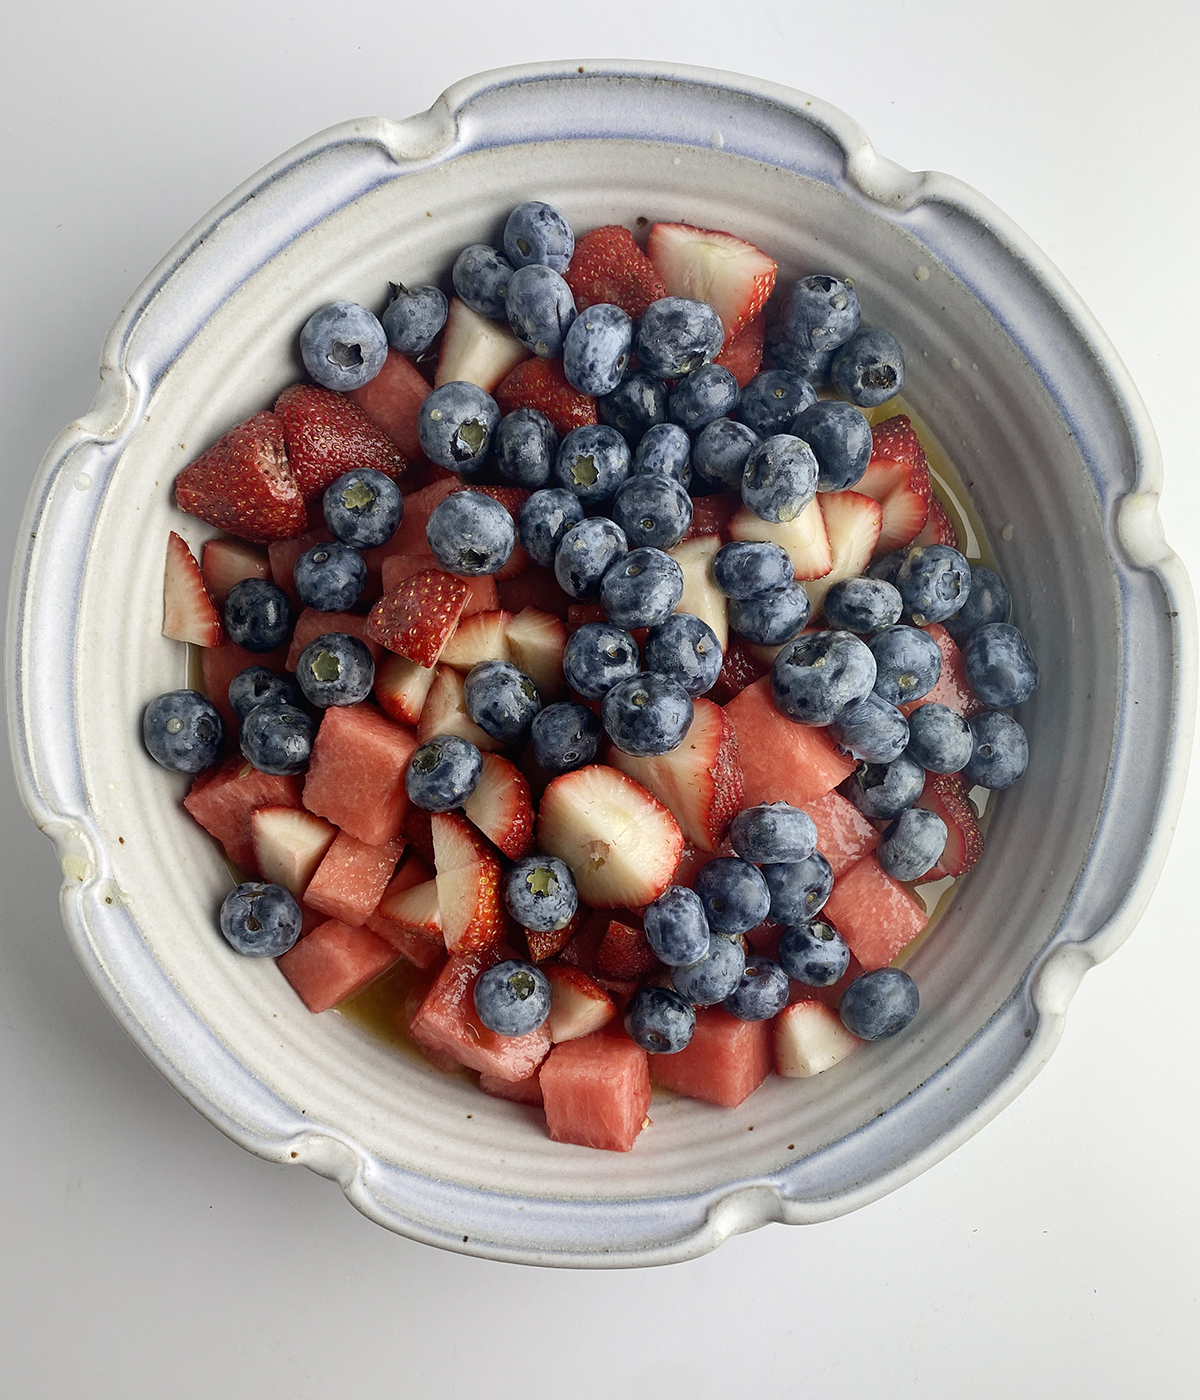 Watermelon strawberries and blueberries mixed in a bowl.